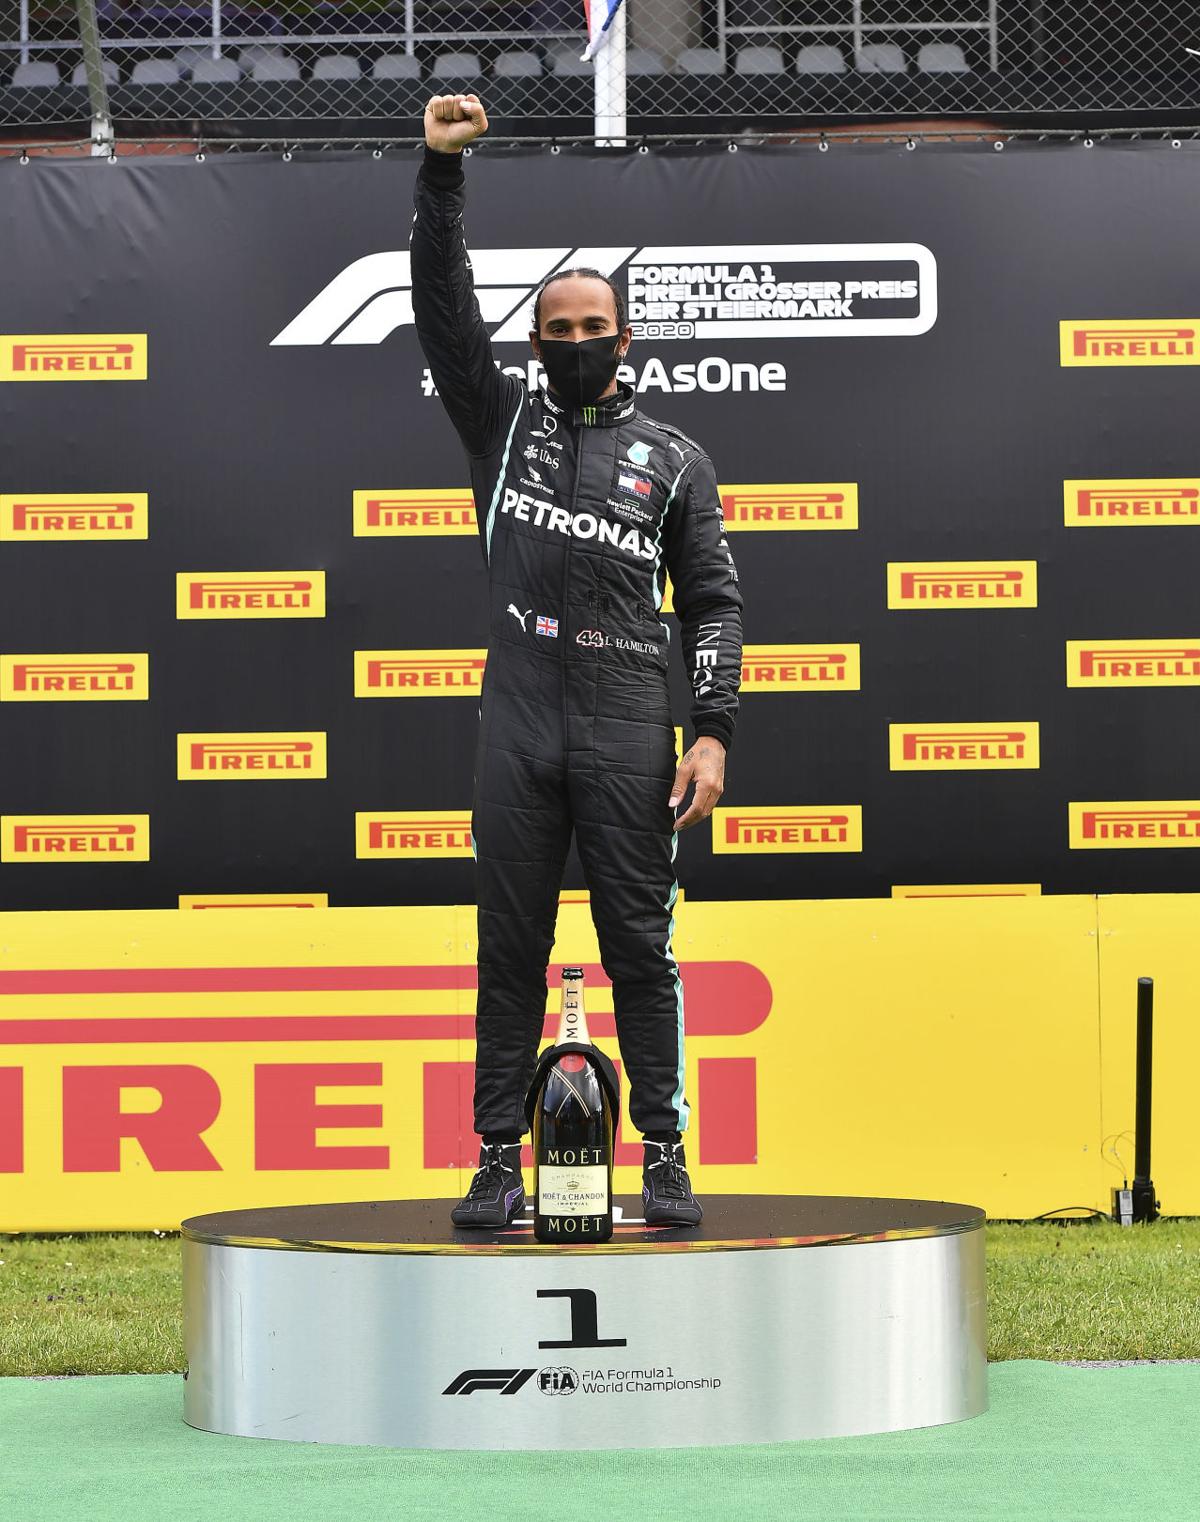 Lewis Hamilton Shows His Support For The Black Lives Matter Movement During His  Styrian Grand Prix Victory